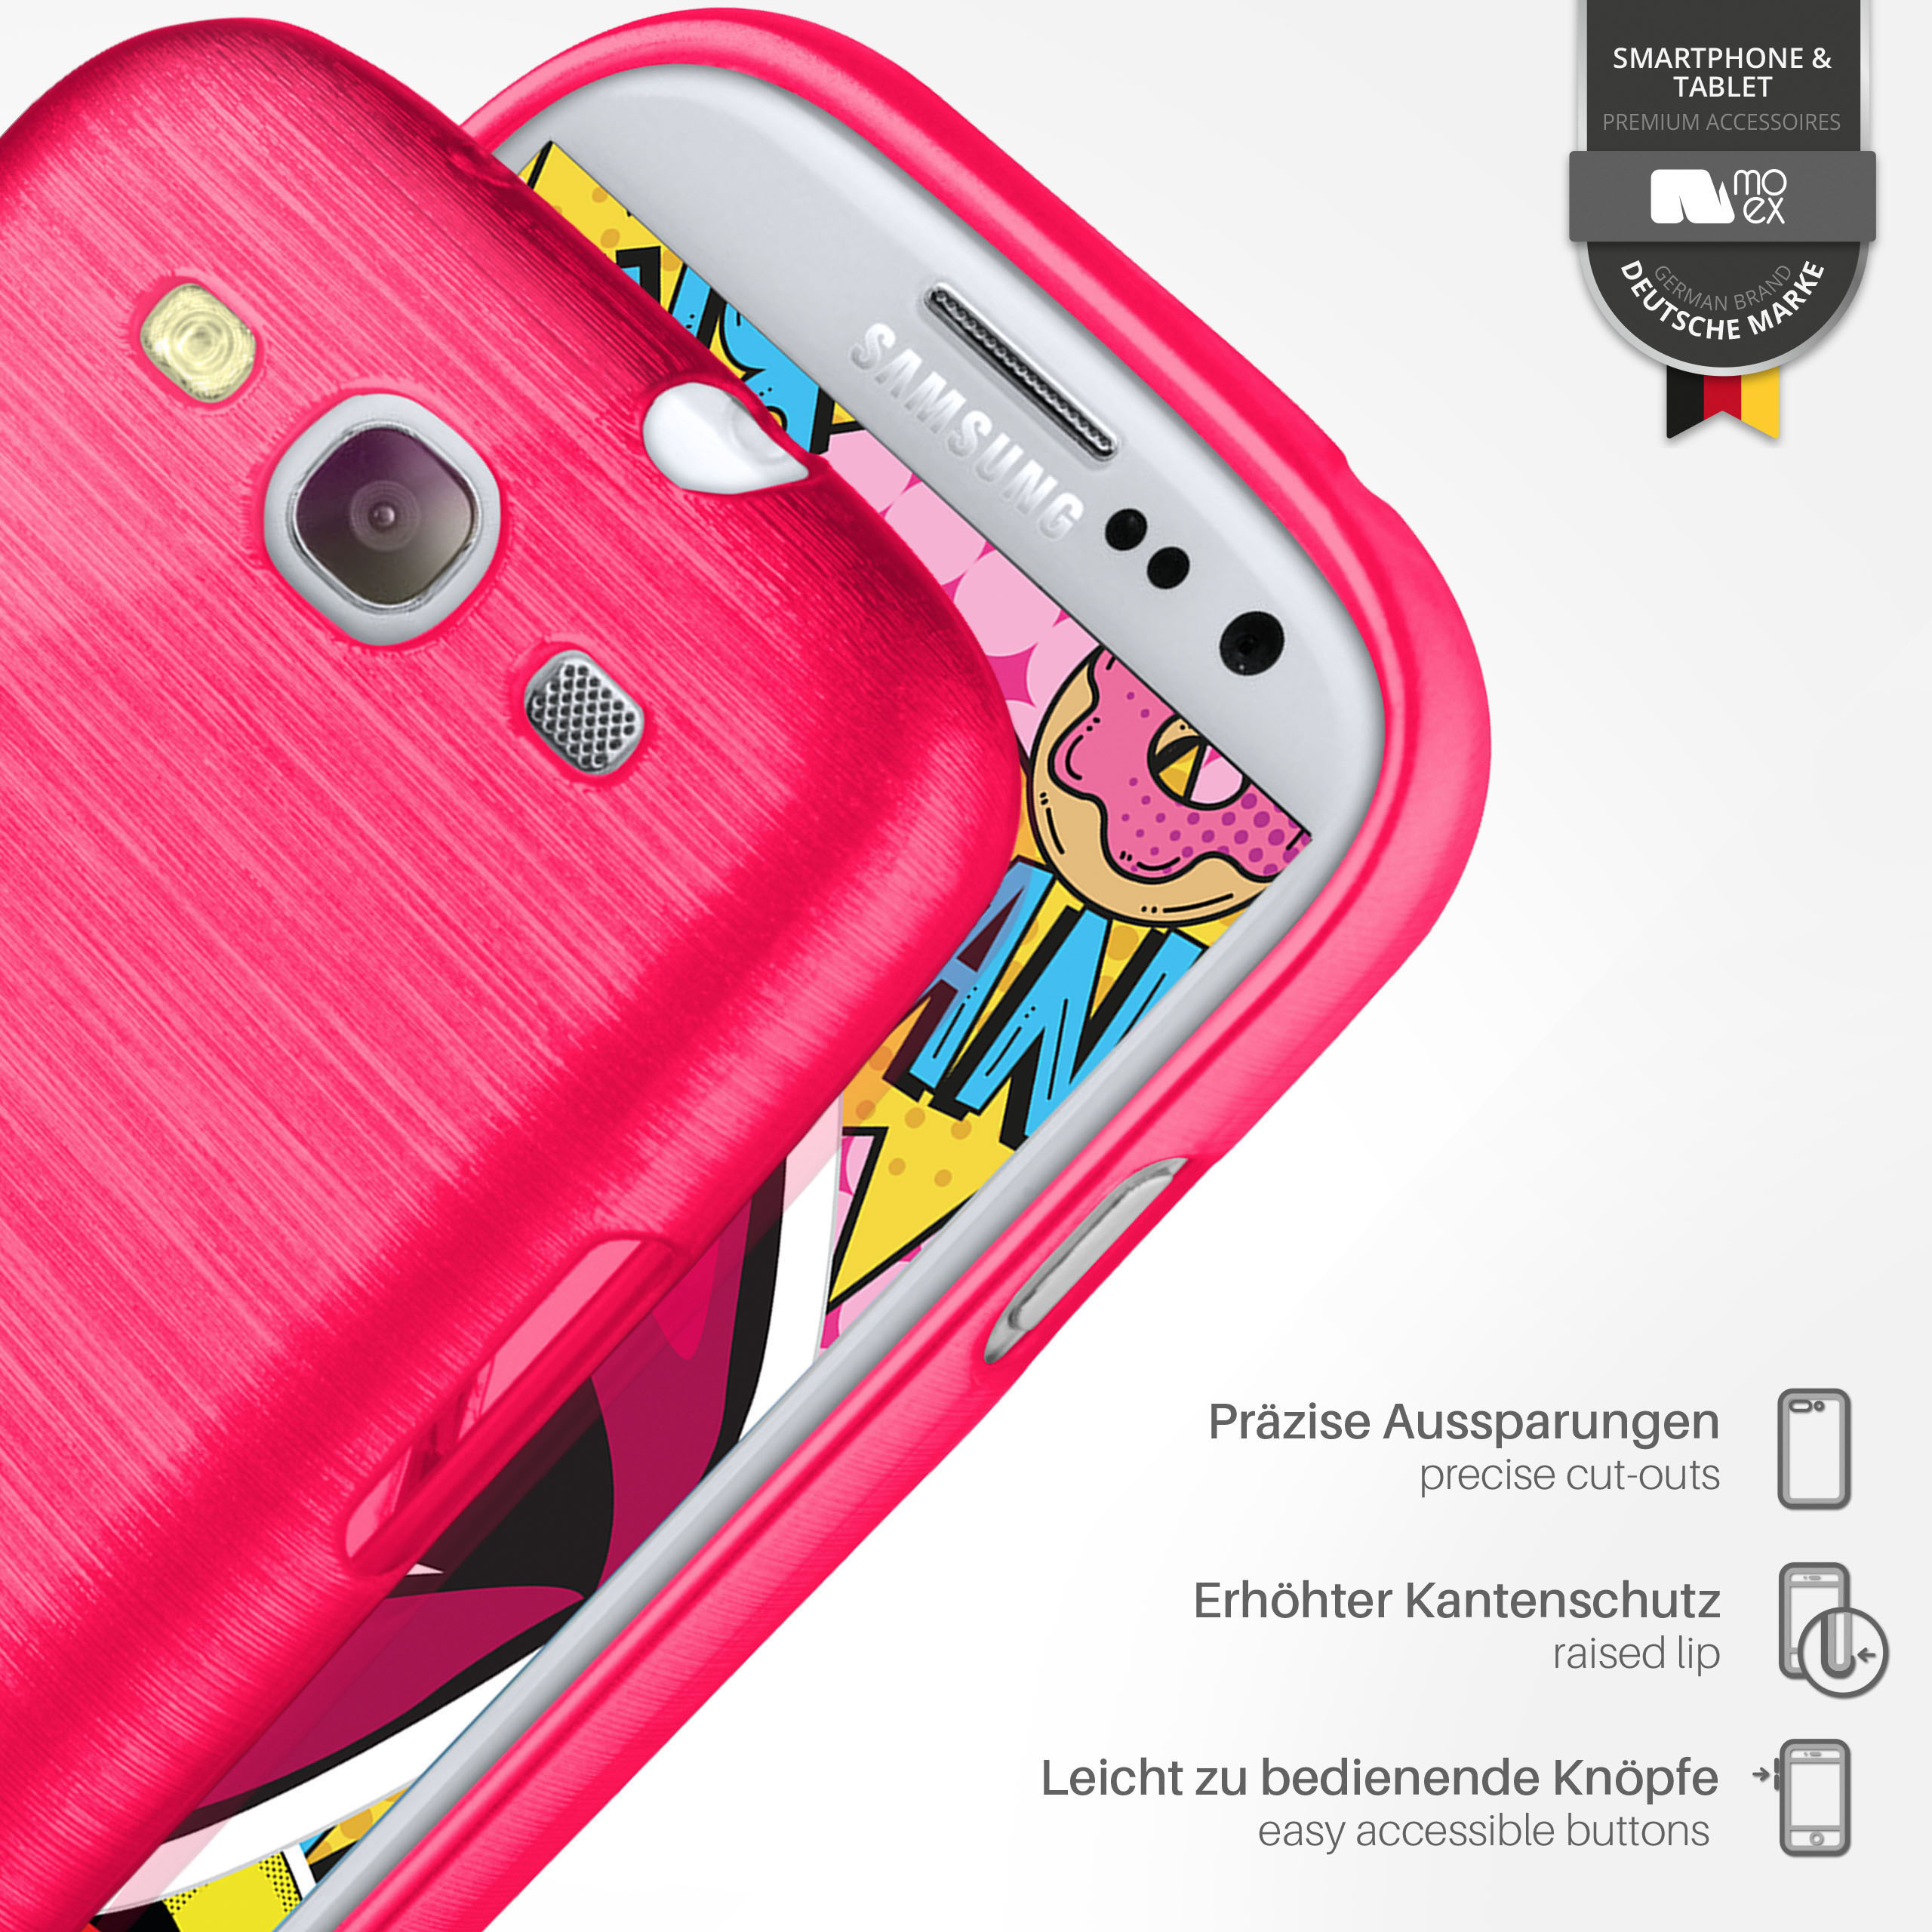 MOEX Brushed Case, Backcover, Samsung, Neo, Galaxy S3 Magenta-Pink S3 